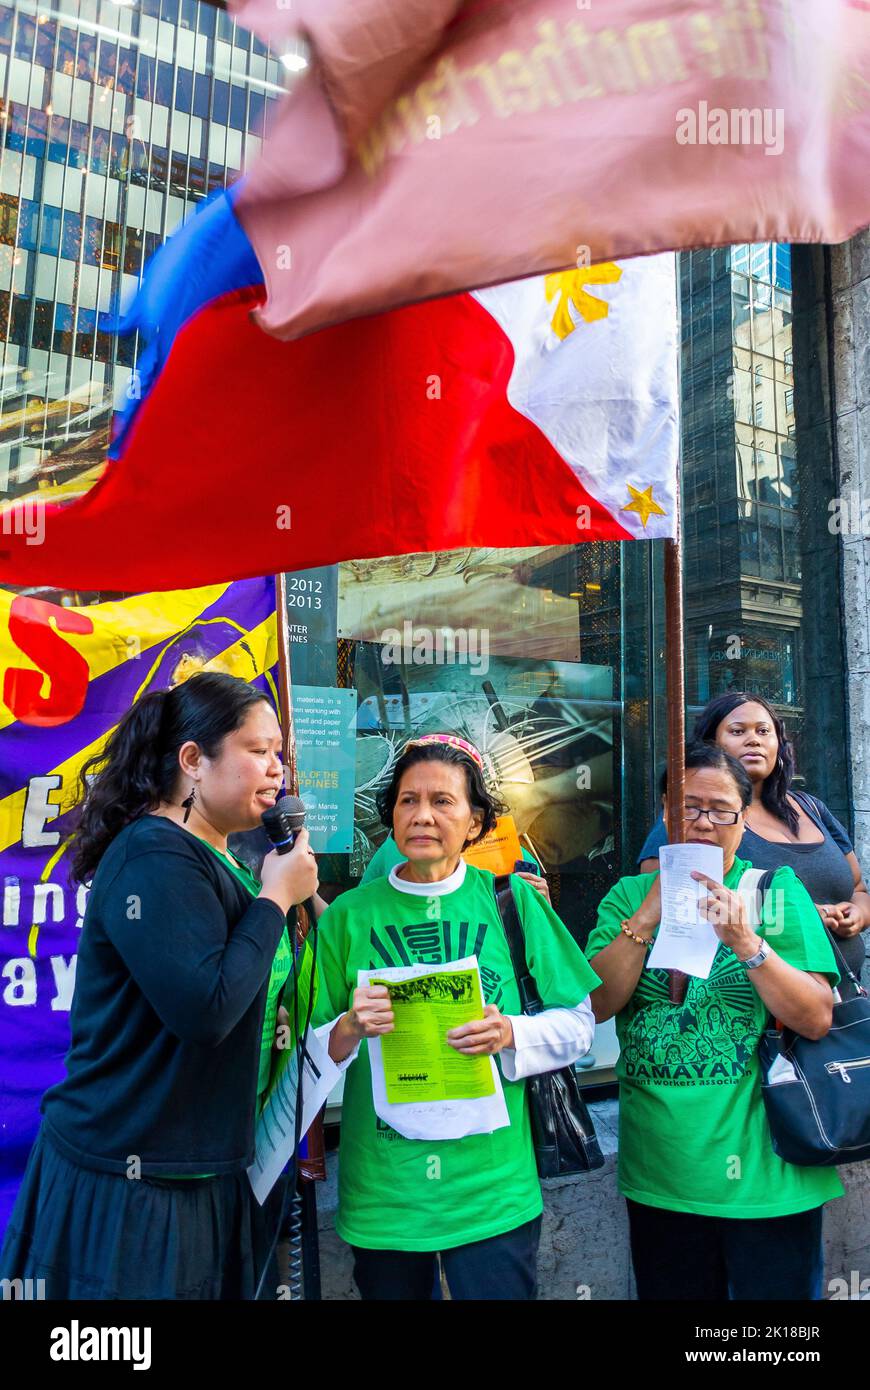 New York City Ny Usa Group Immigrant Women Demonstrating Against Human Trafficking Of